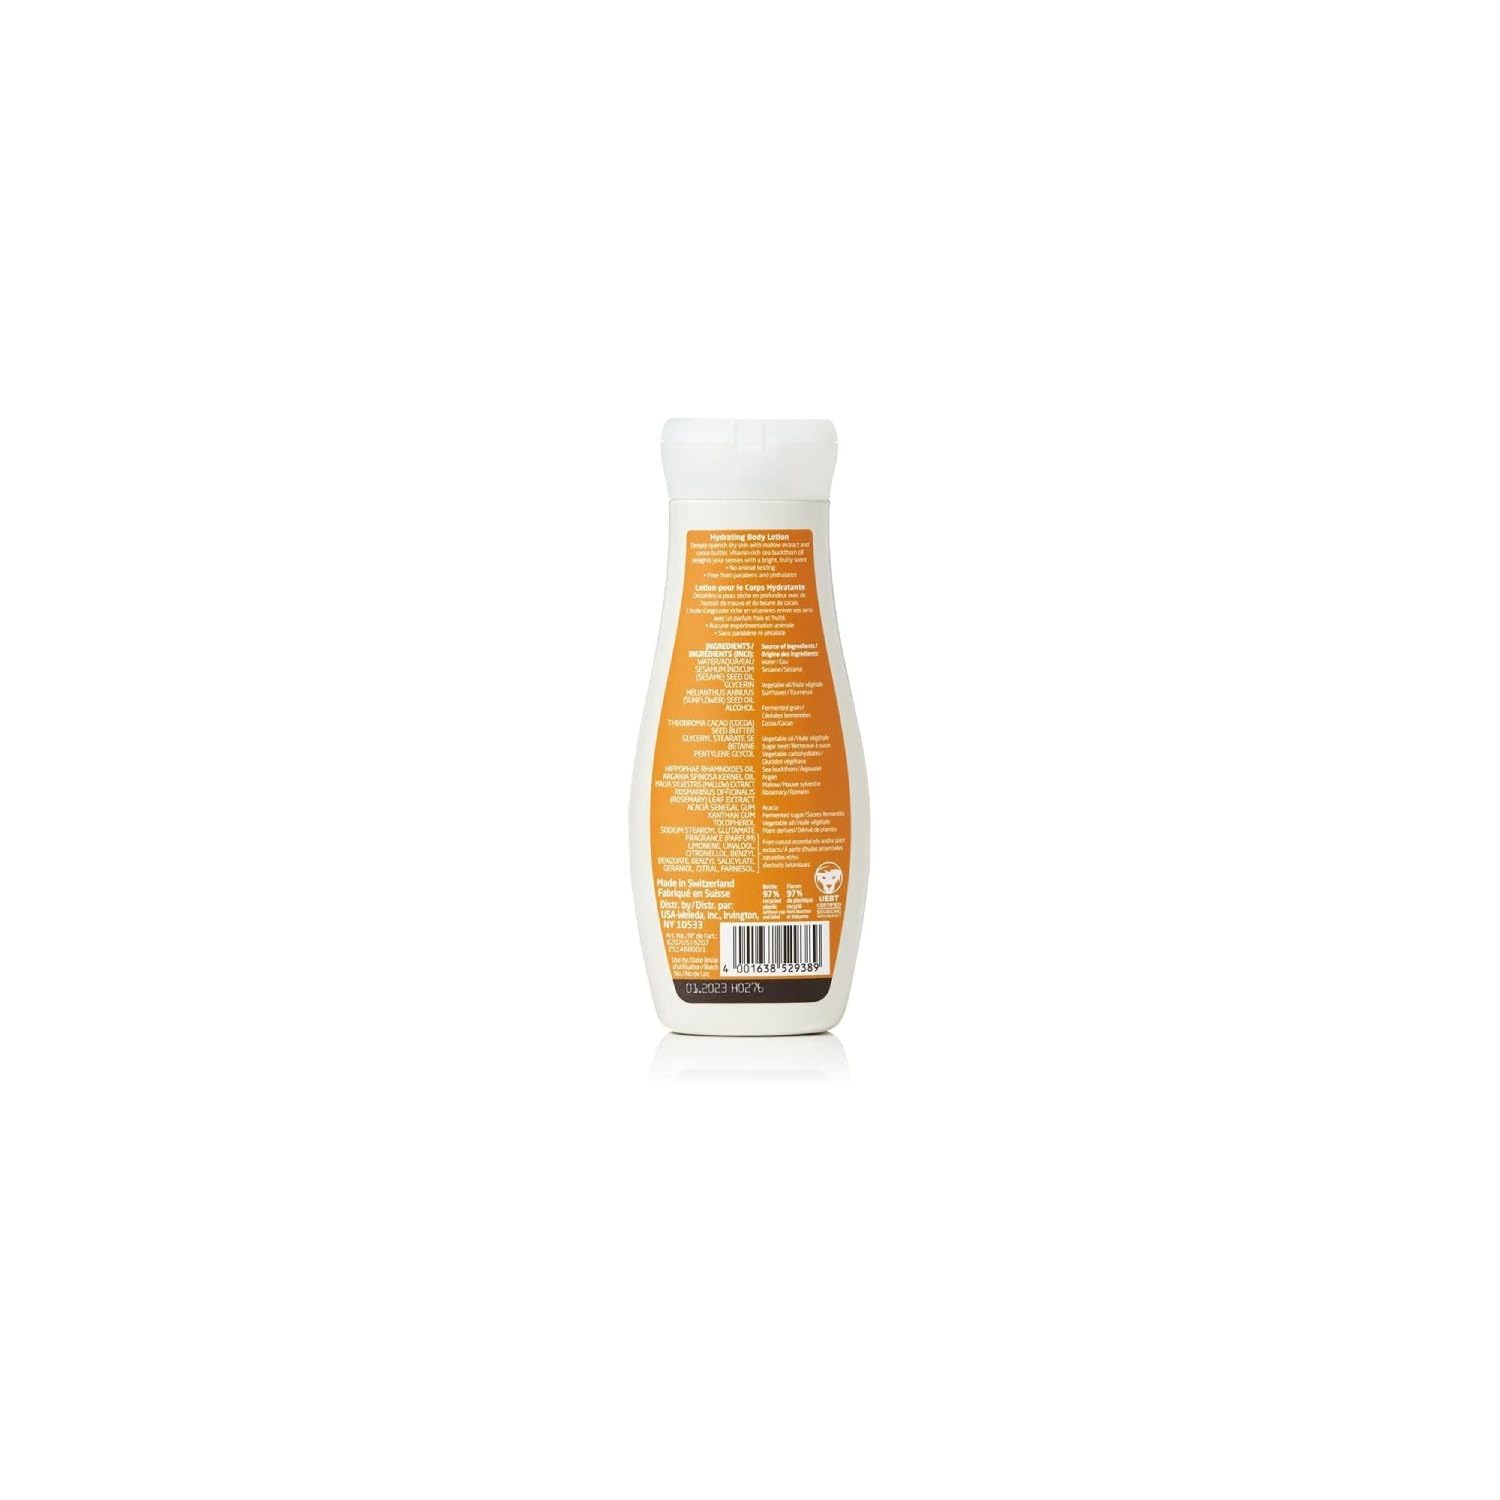 Weleda Hydrating Sea Buckthorn Body Lotion, 6.8 Fluid Ounces (Pack Of 1) : Beauty & Personal Care